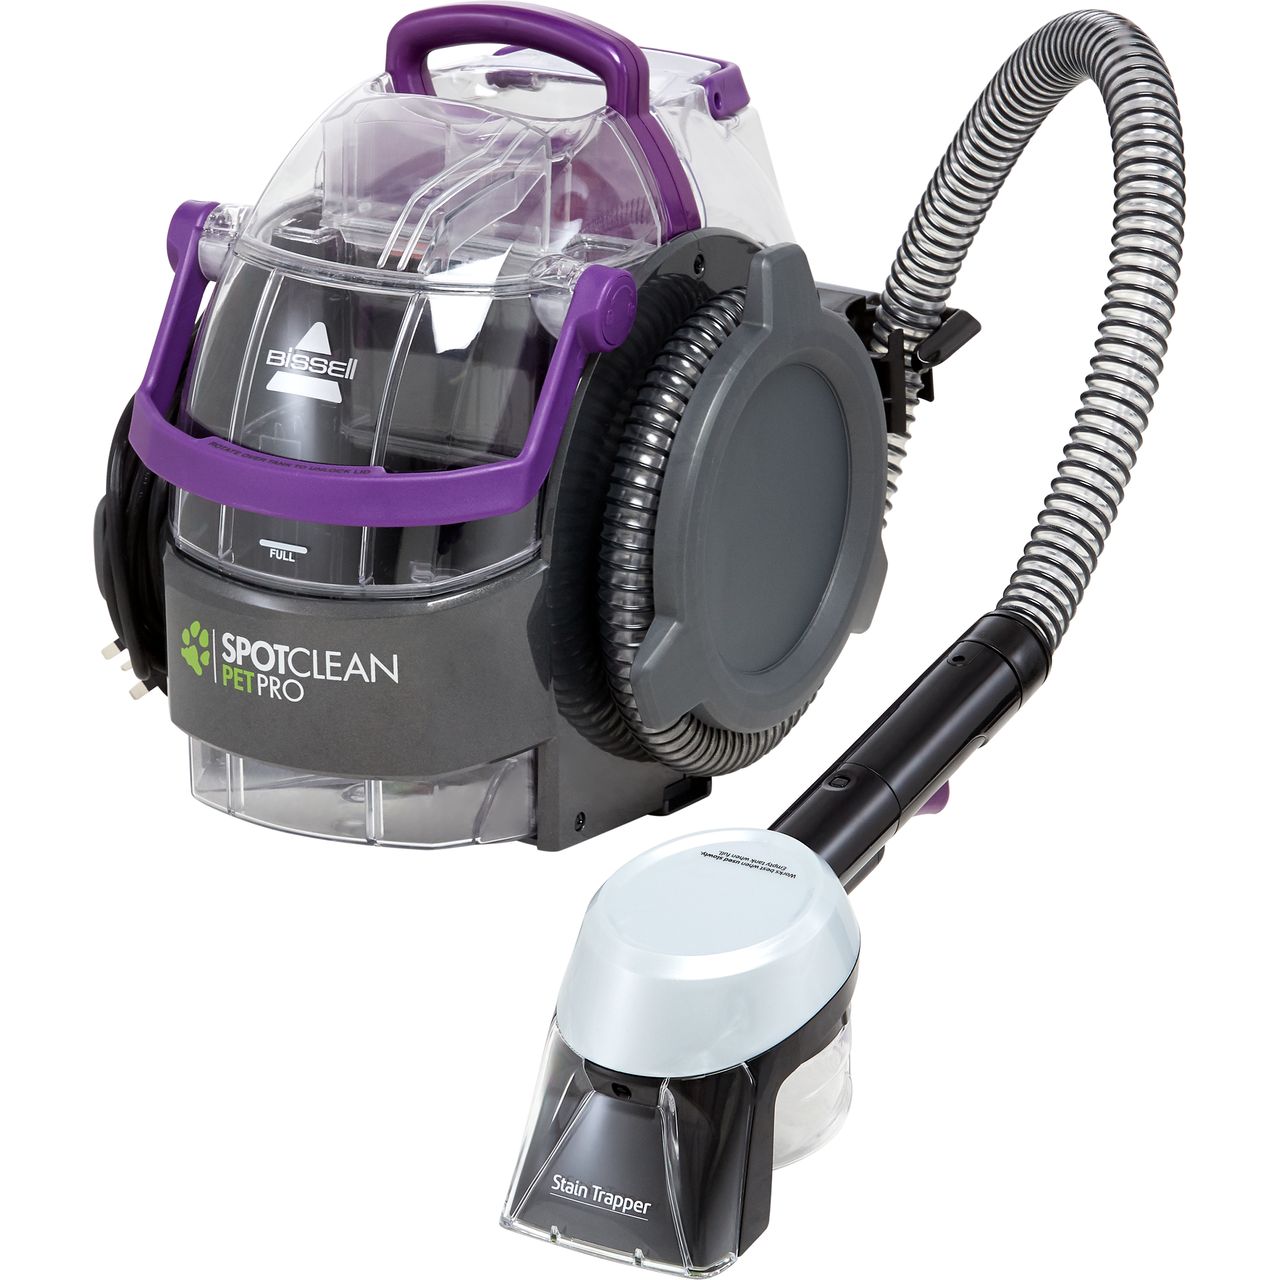 Bissell Spotclean Pet